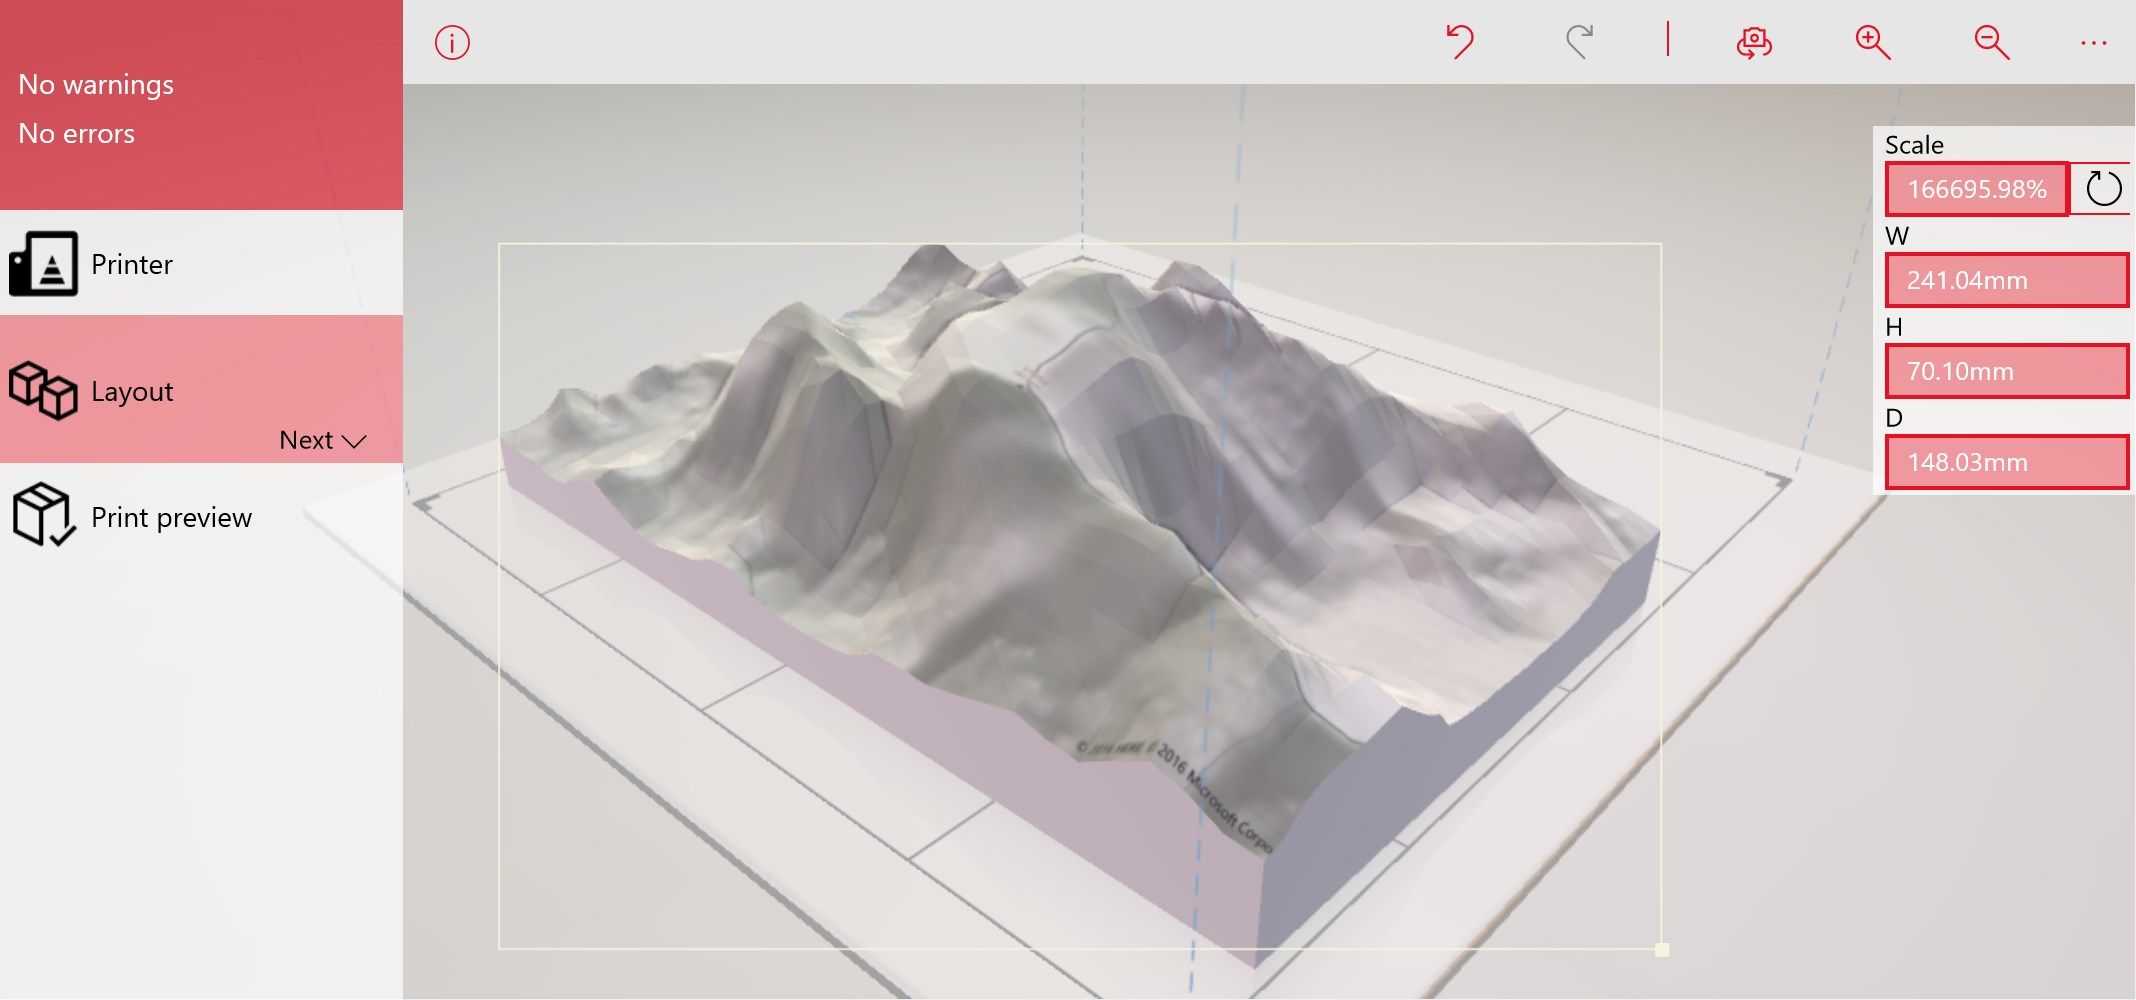 Print a model directly from the app, save to 3MF or STL, or print to the Model Print Service.